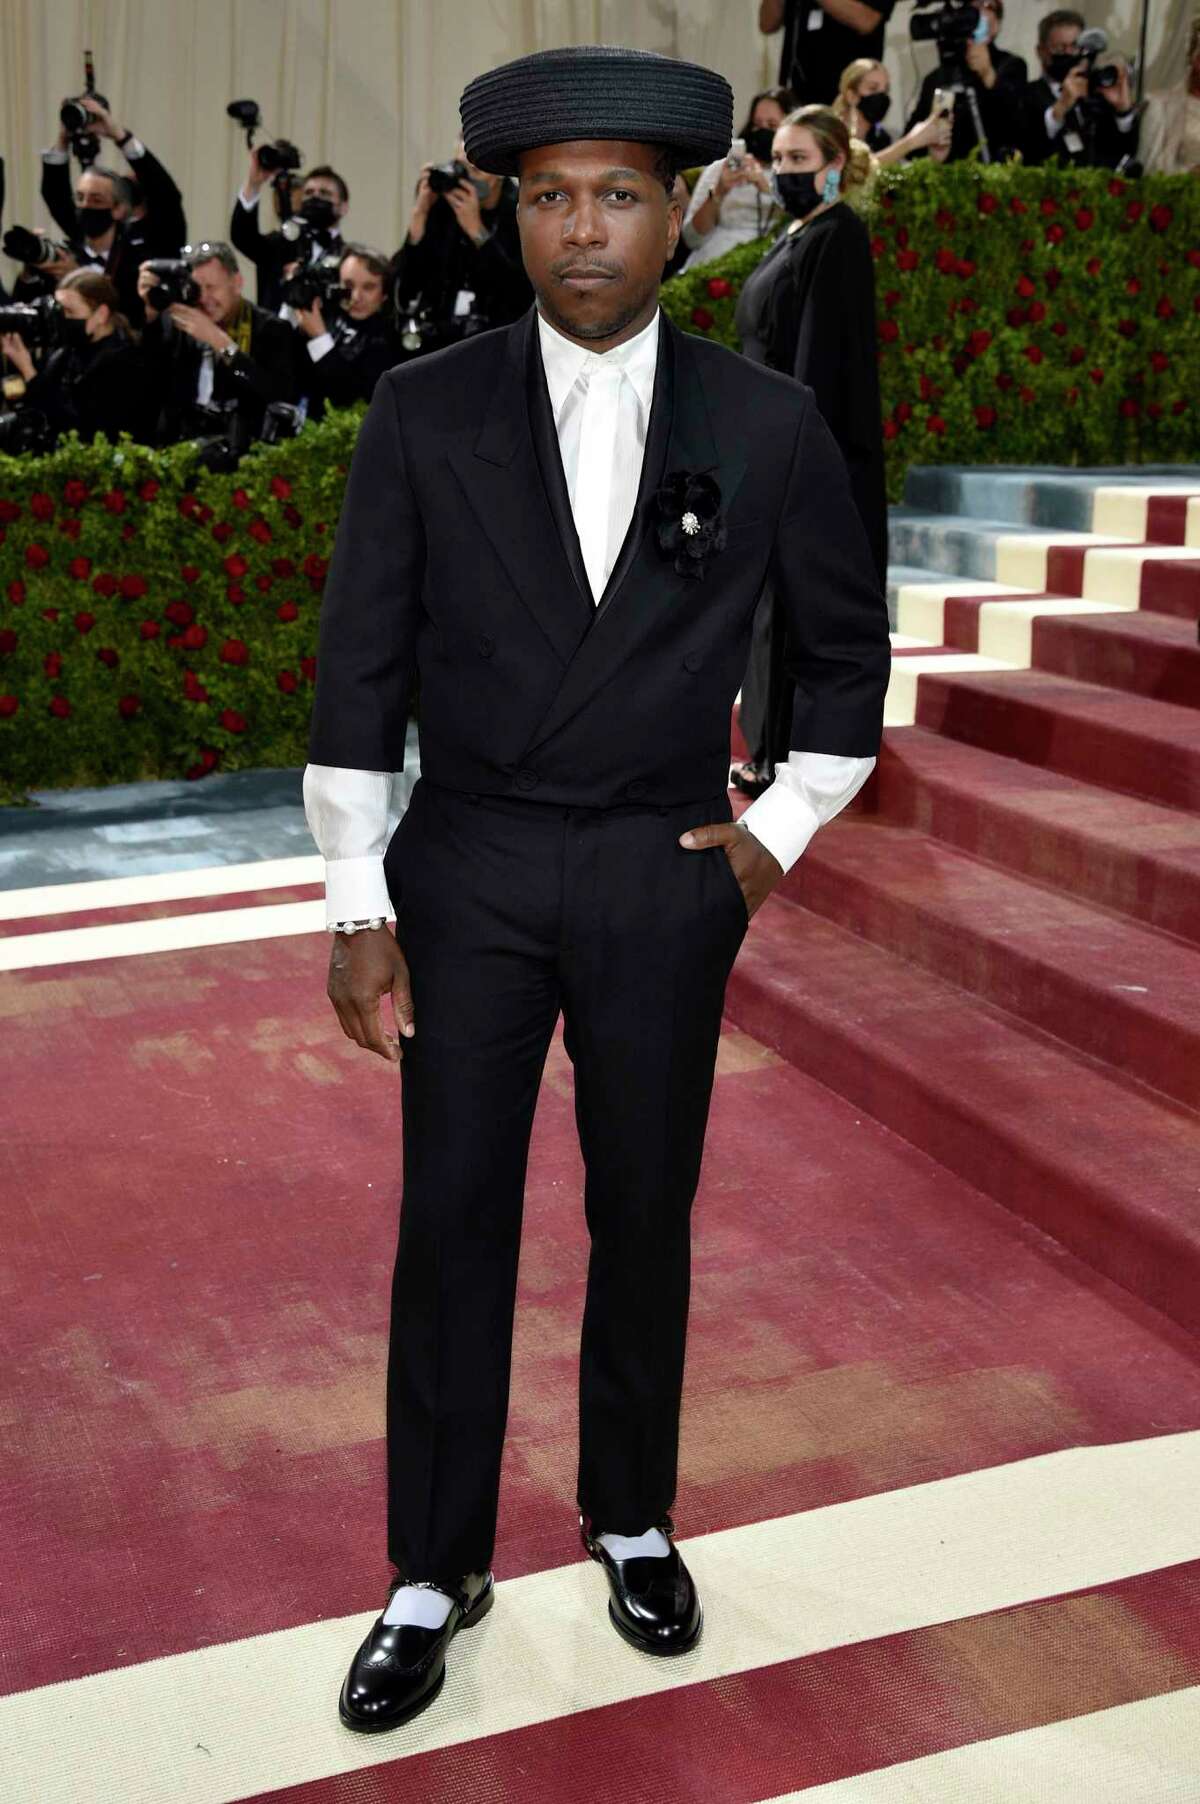 Leslie Odom Jr. attends The Metropolitan Museum of Art's Costume Institute benefit gala celebrating the opening of the "In America: An Anthology of Fashion" exhibition on Monday, May 2, 2022, in New York. (Photo by Evan Agostini/Invision/AP)